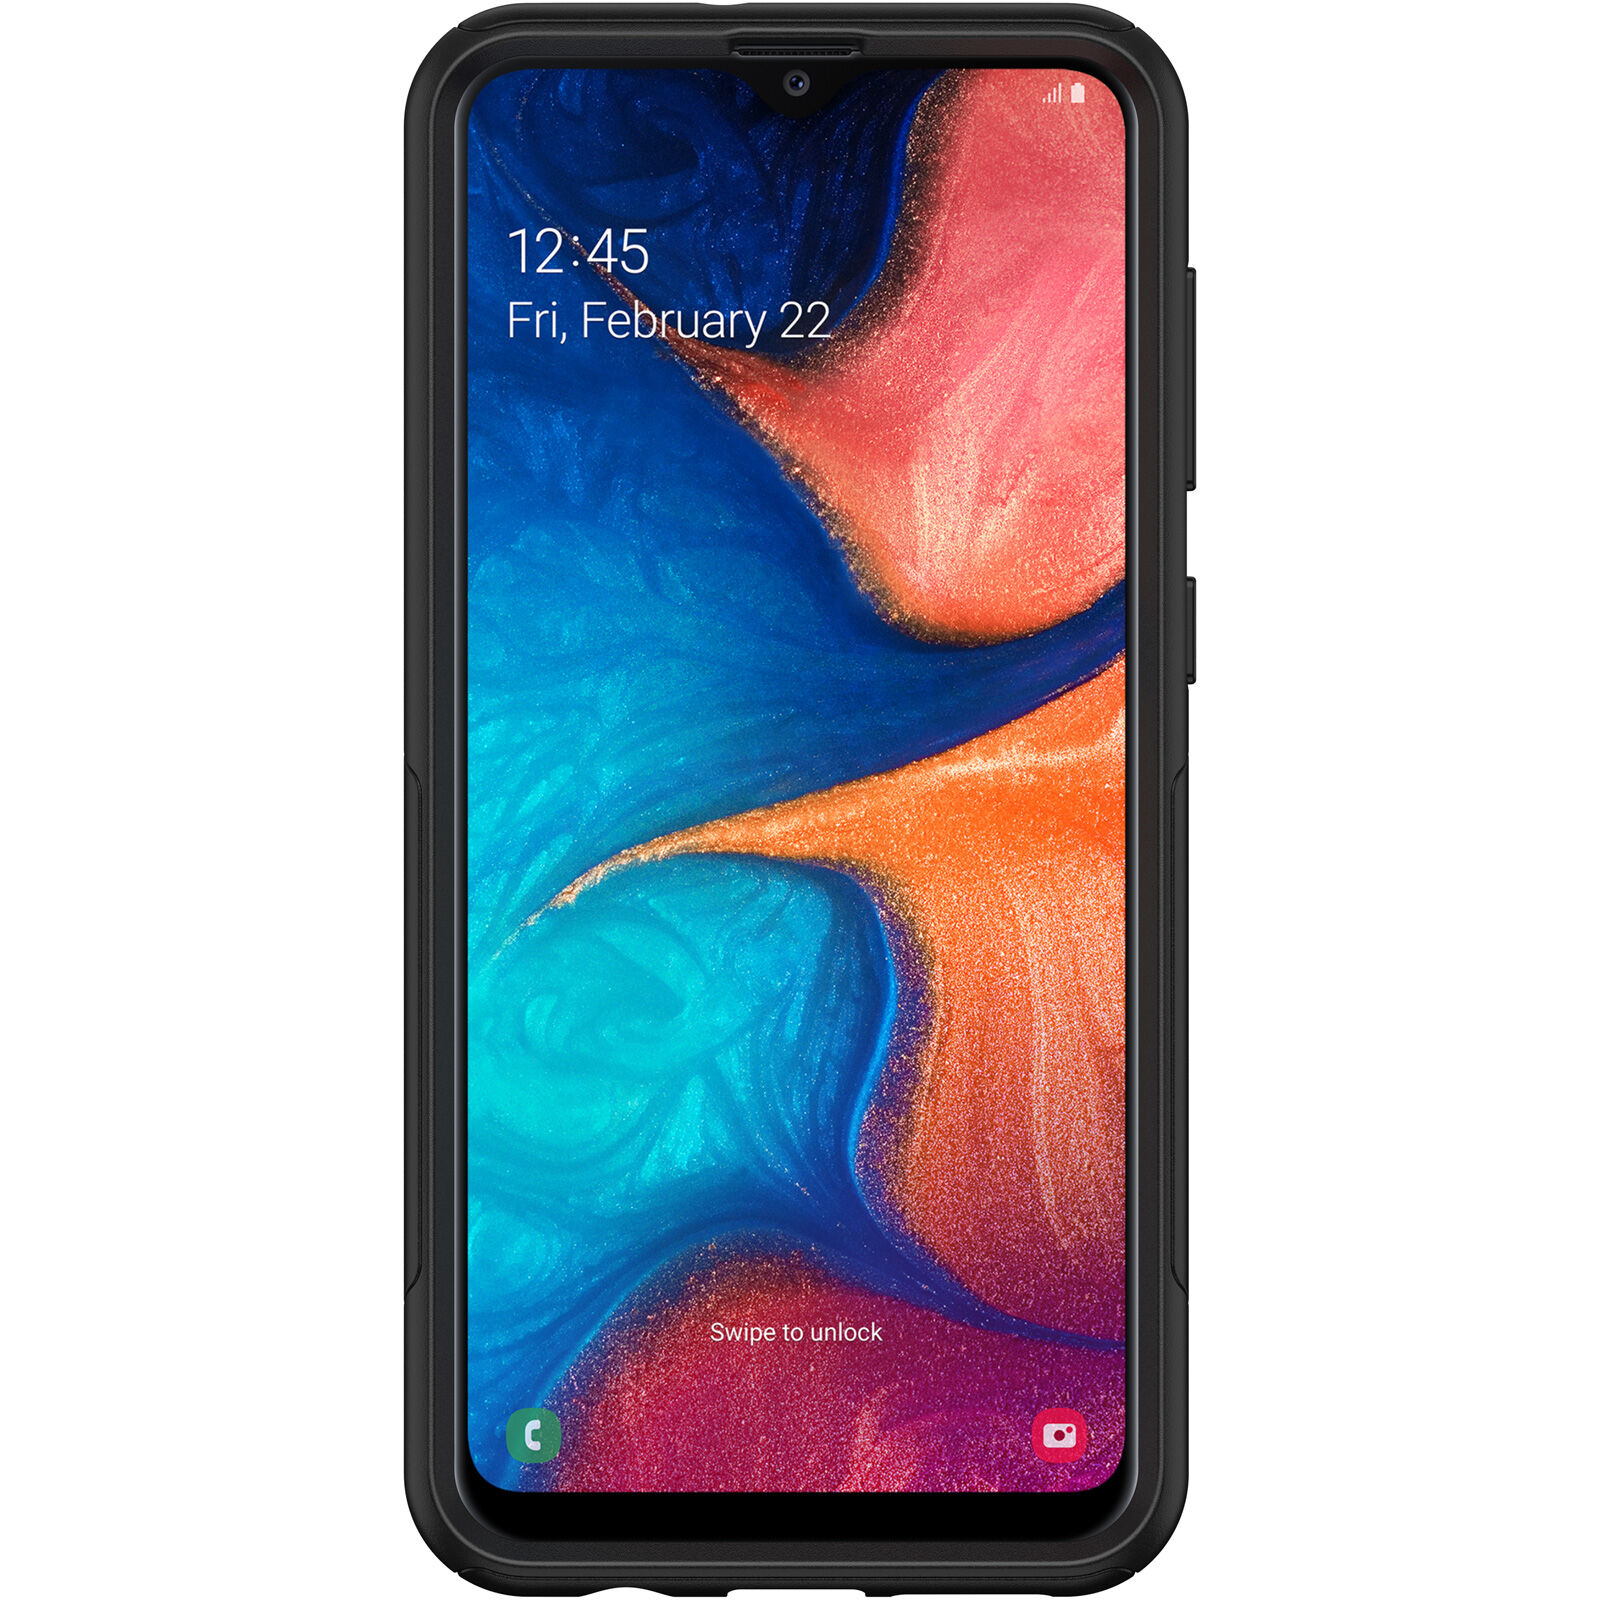 Samsung Galaxy A20 cases from OtterBox